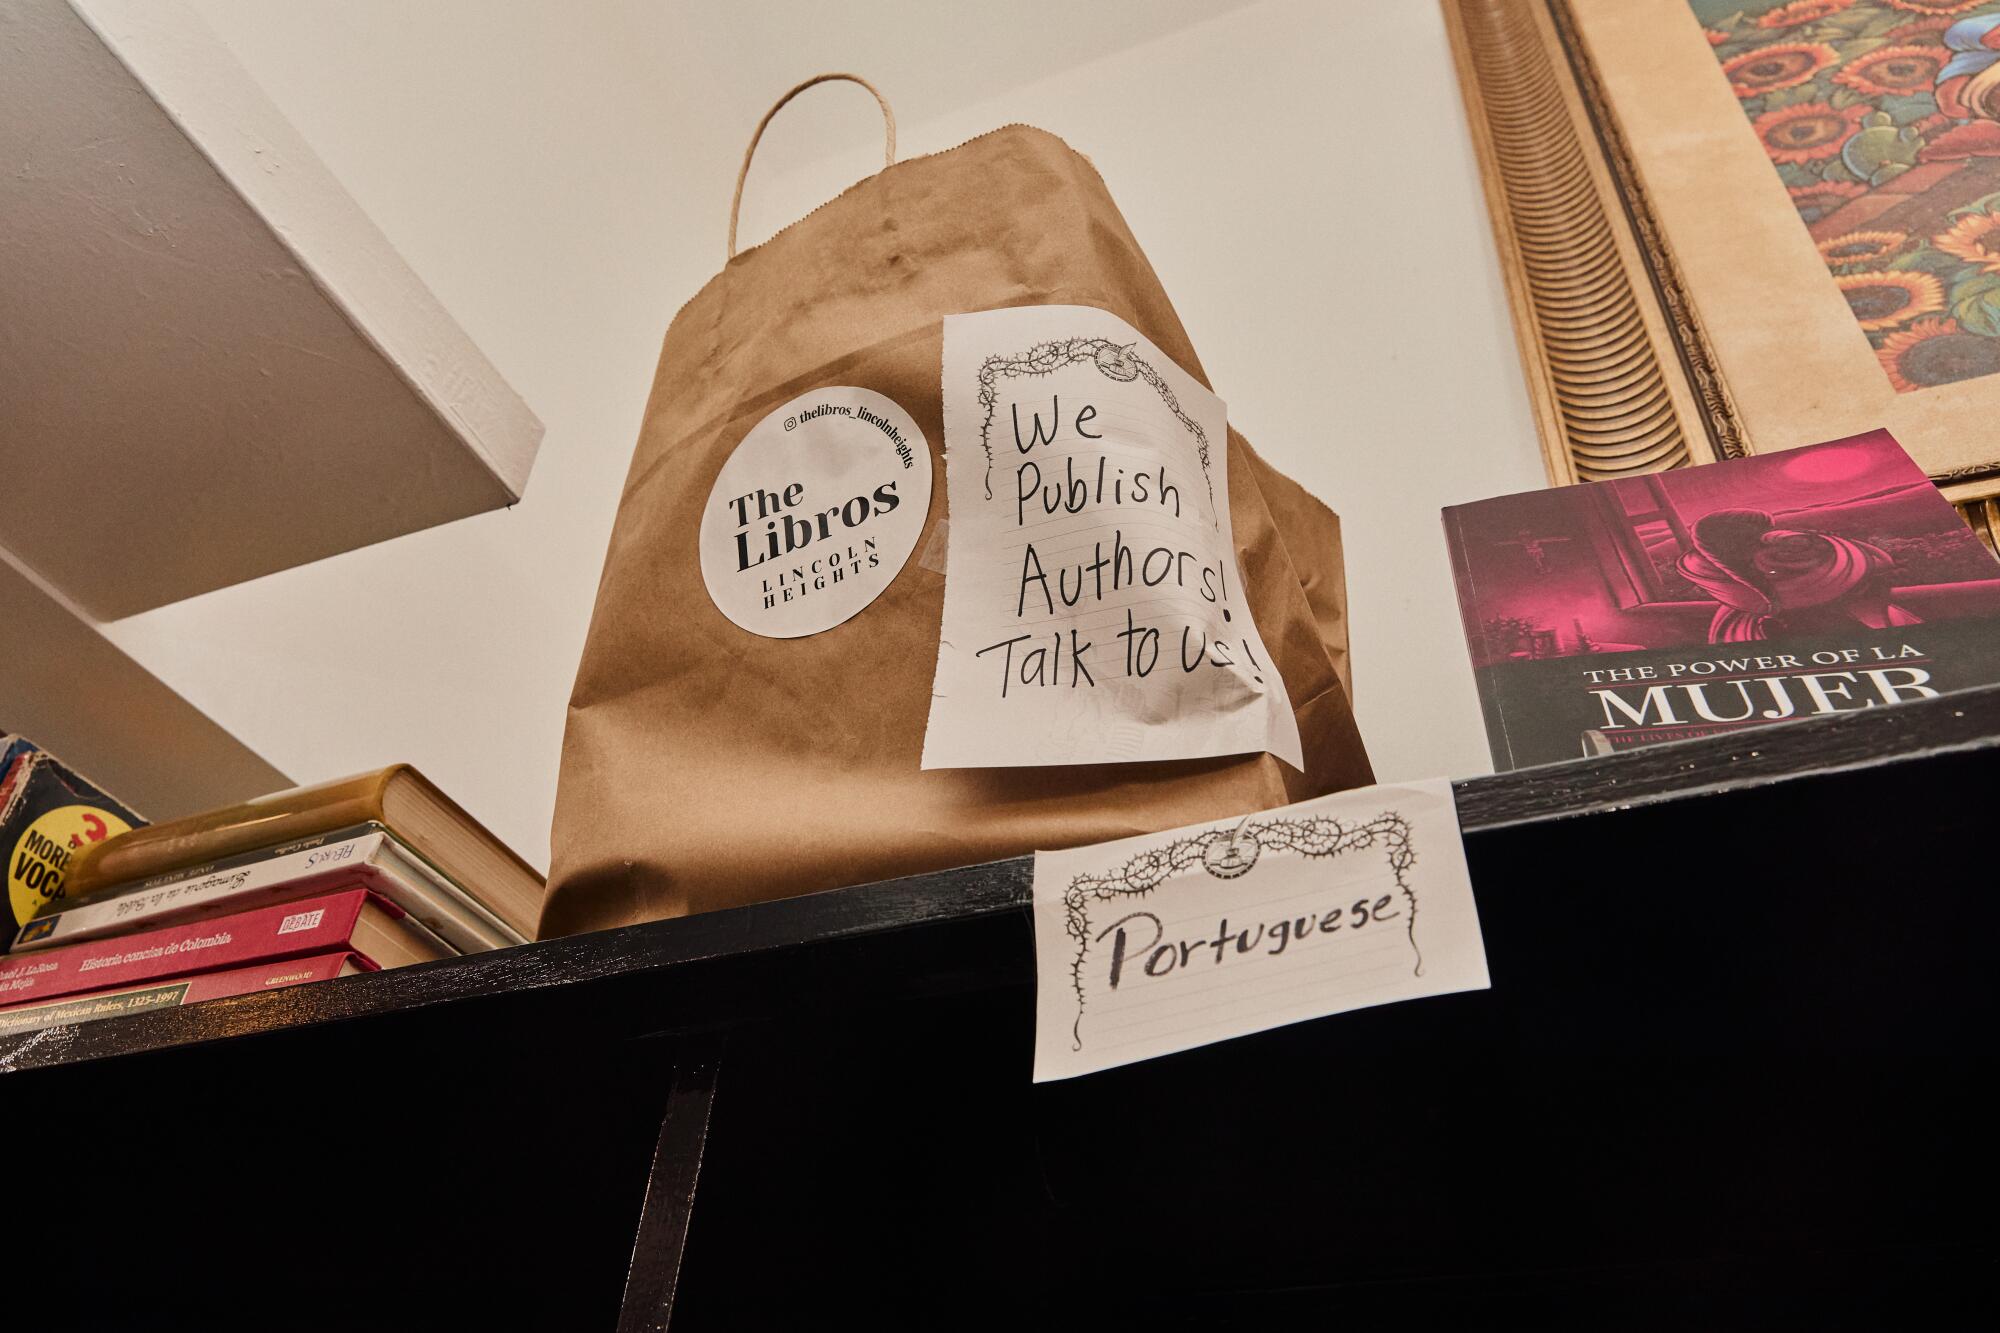 A paper bag with a sign that reads "We publish authors, talk to us" sits atop a shelf at the Libros bookshop.